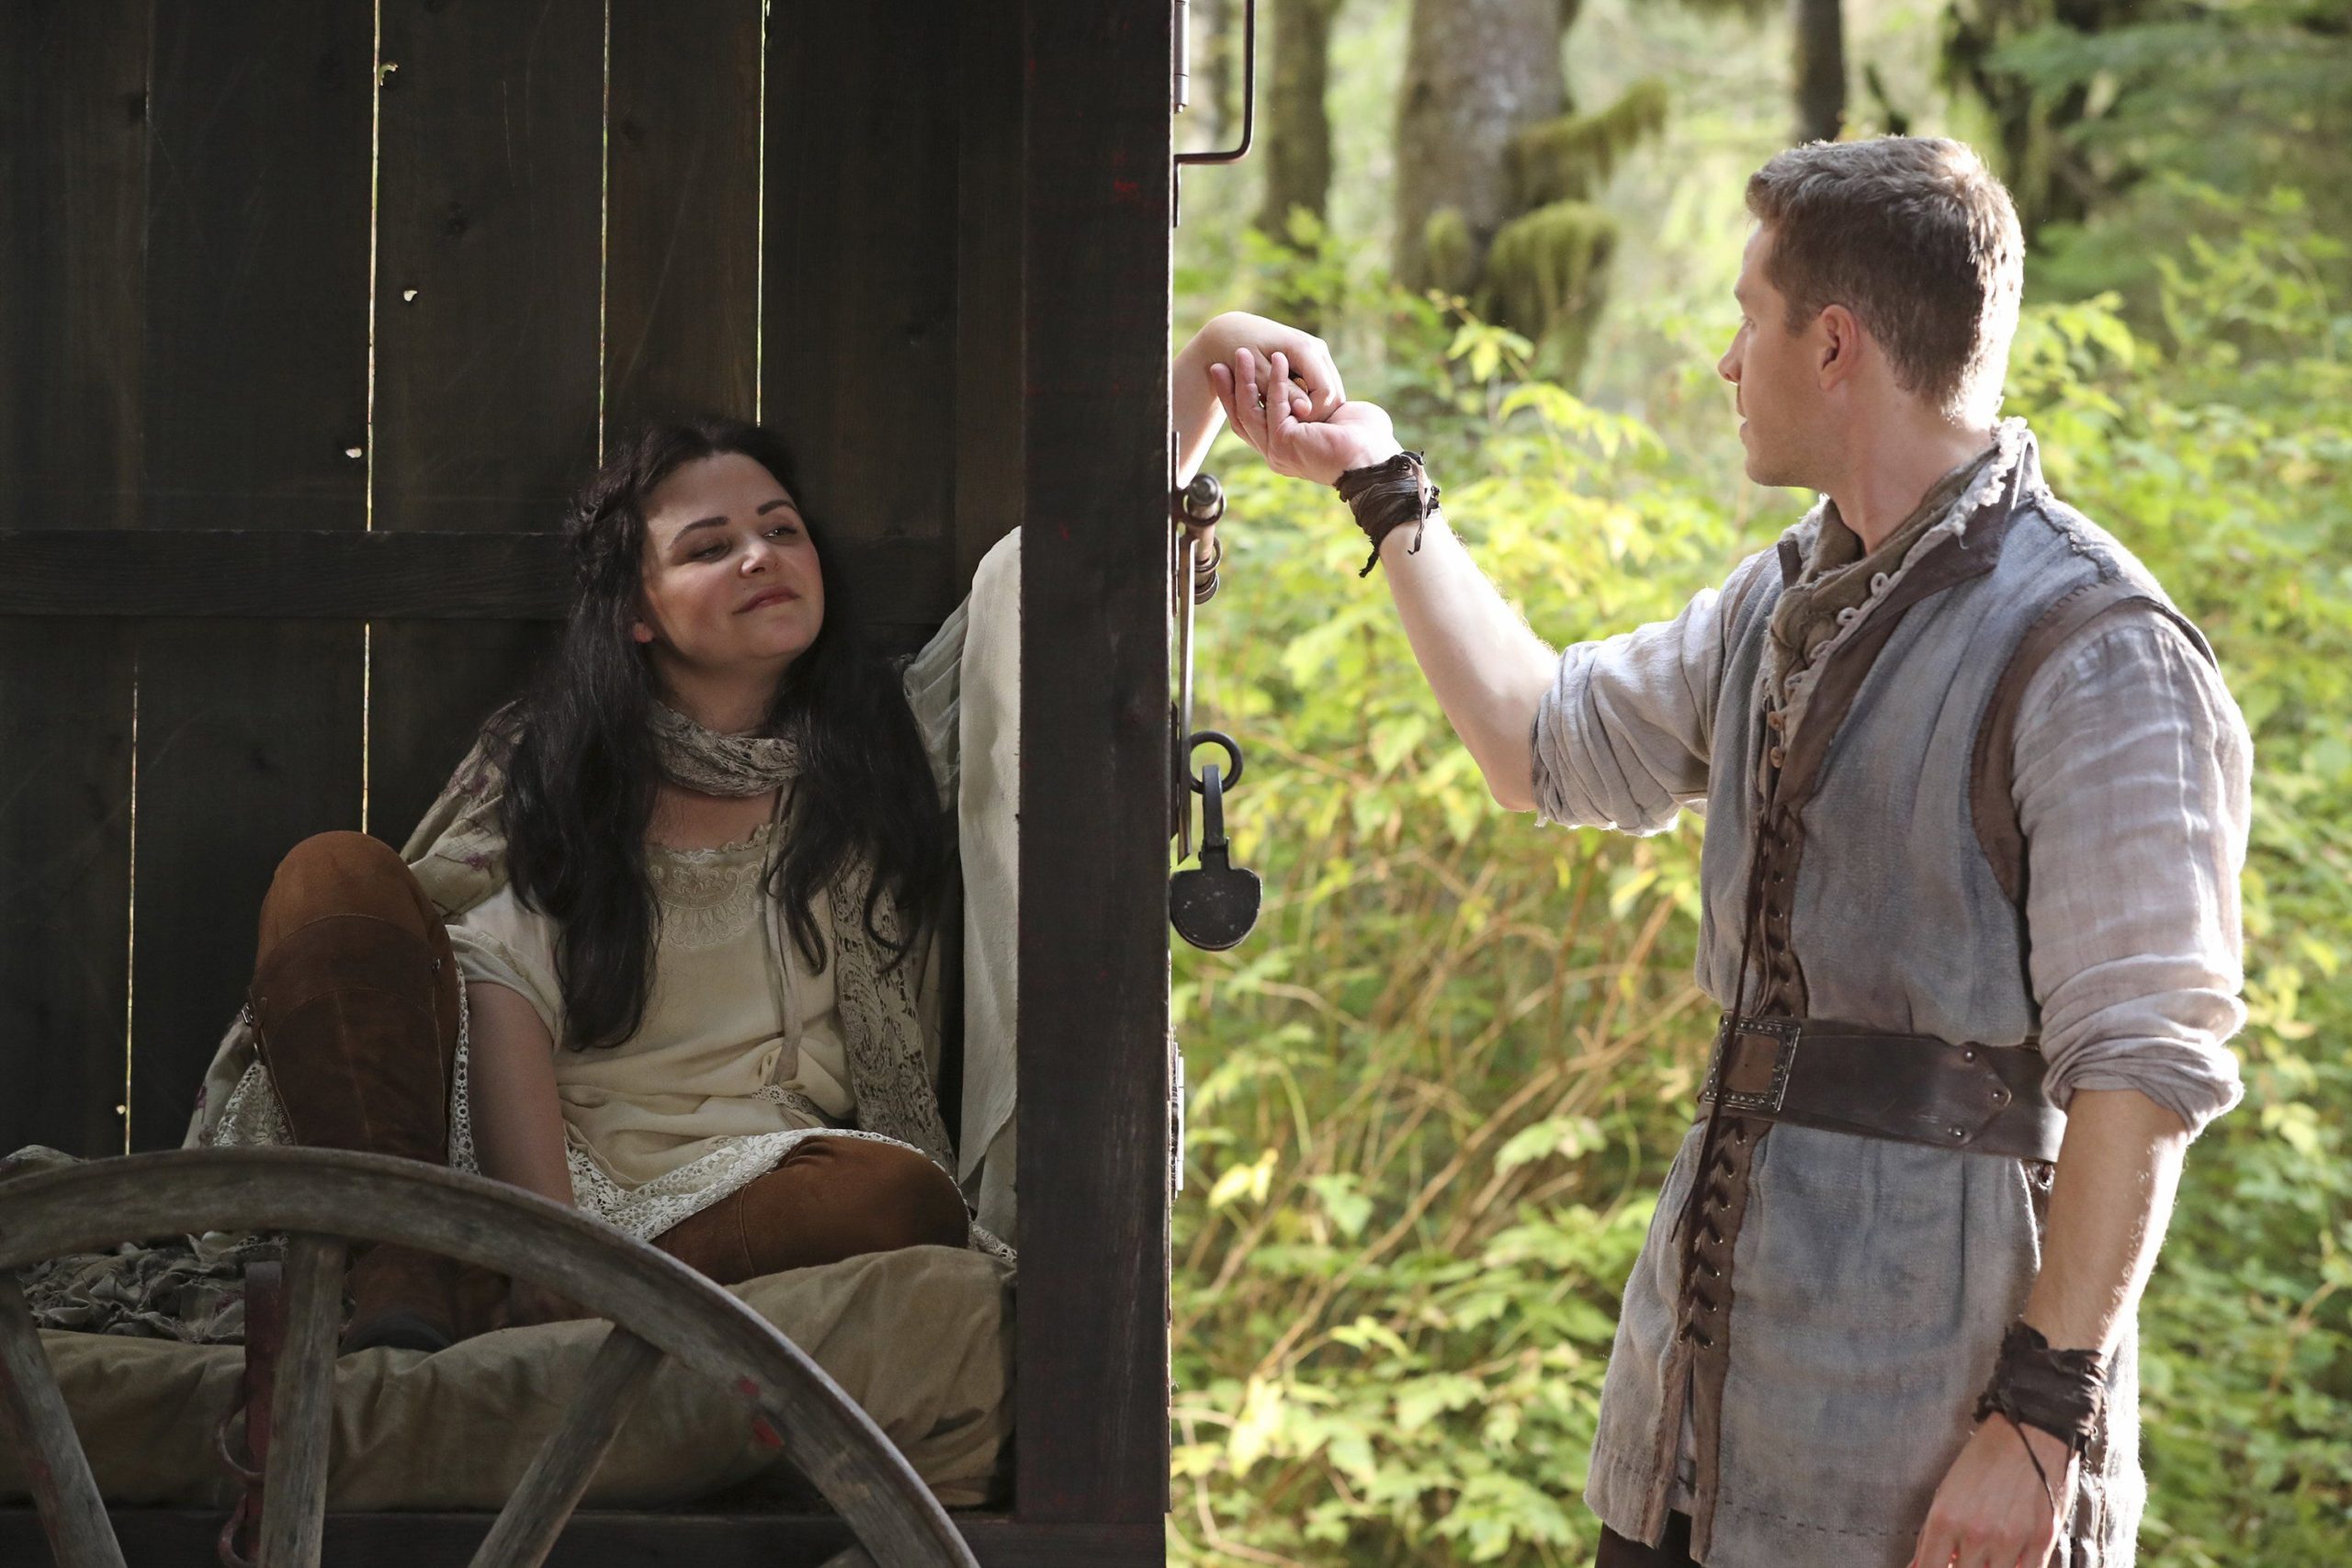 Snow White and Prince Charming are touching hands as Snow sits in a carriage, creating barrier between them.